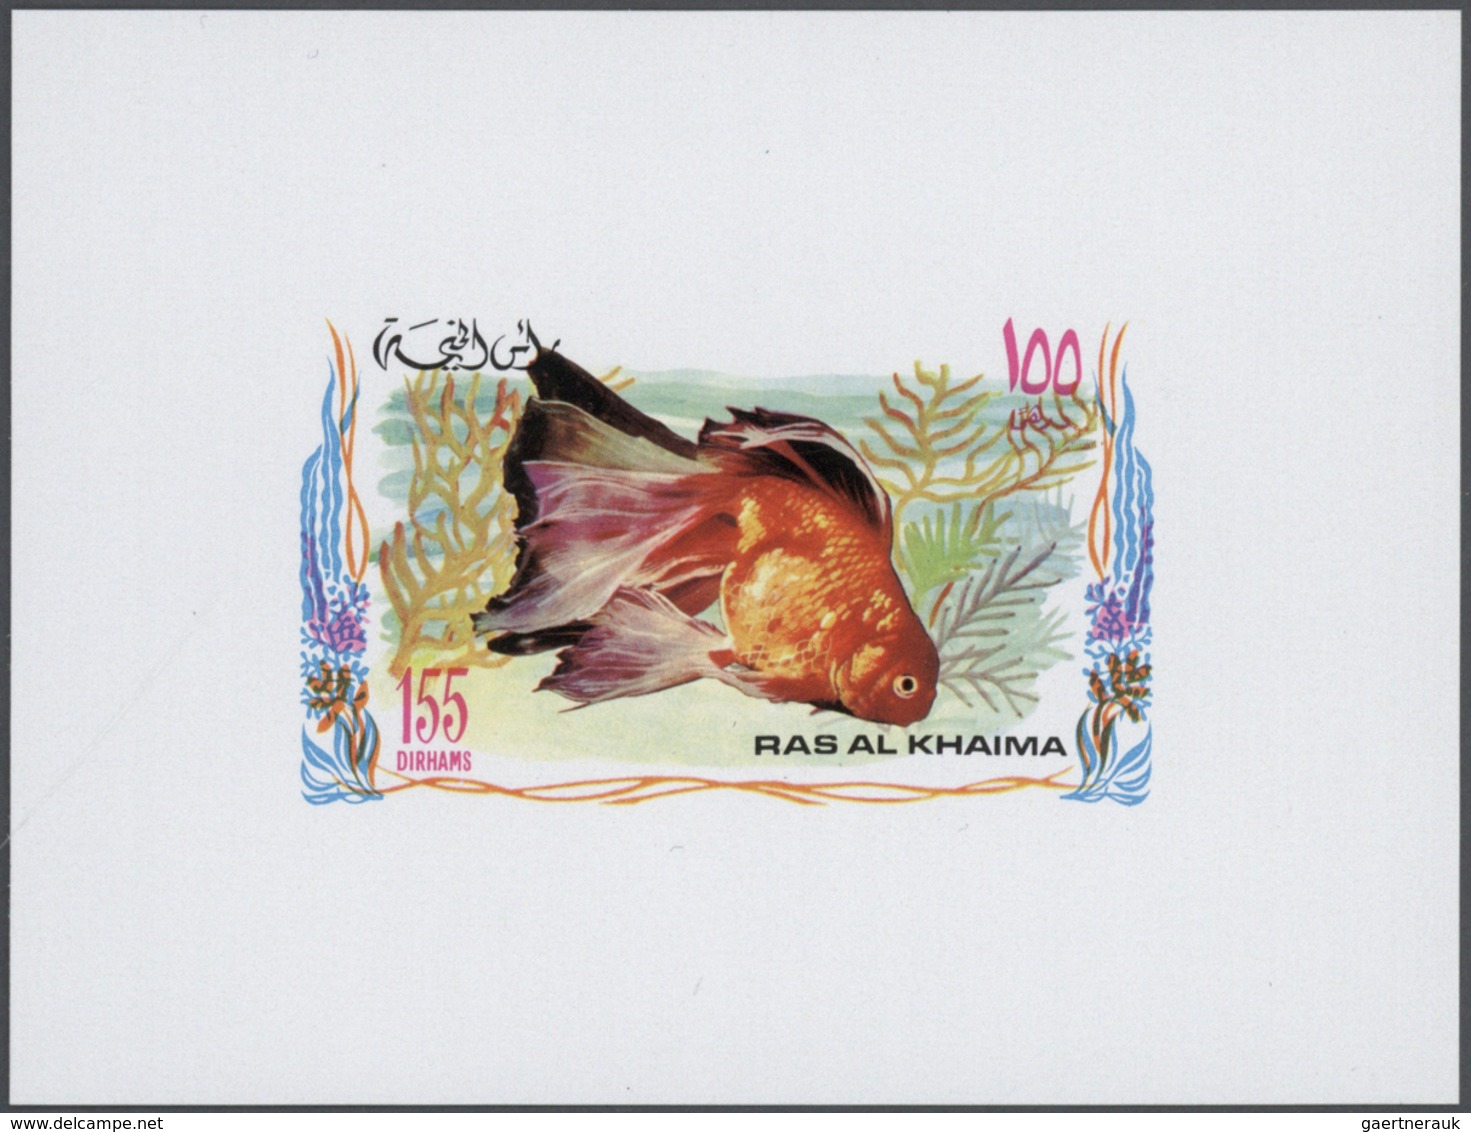 23906 Ras al Khaima: 1972, u/m collection in a thick stockbook with attractive thematic issues like Birds,